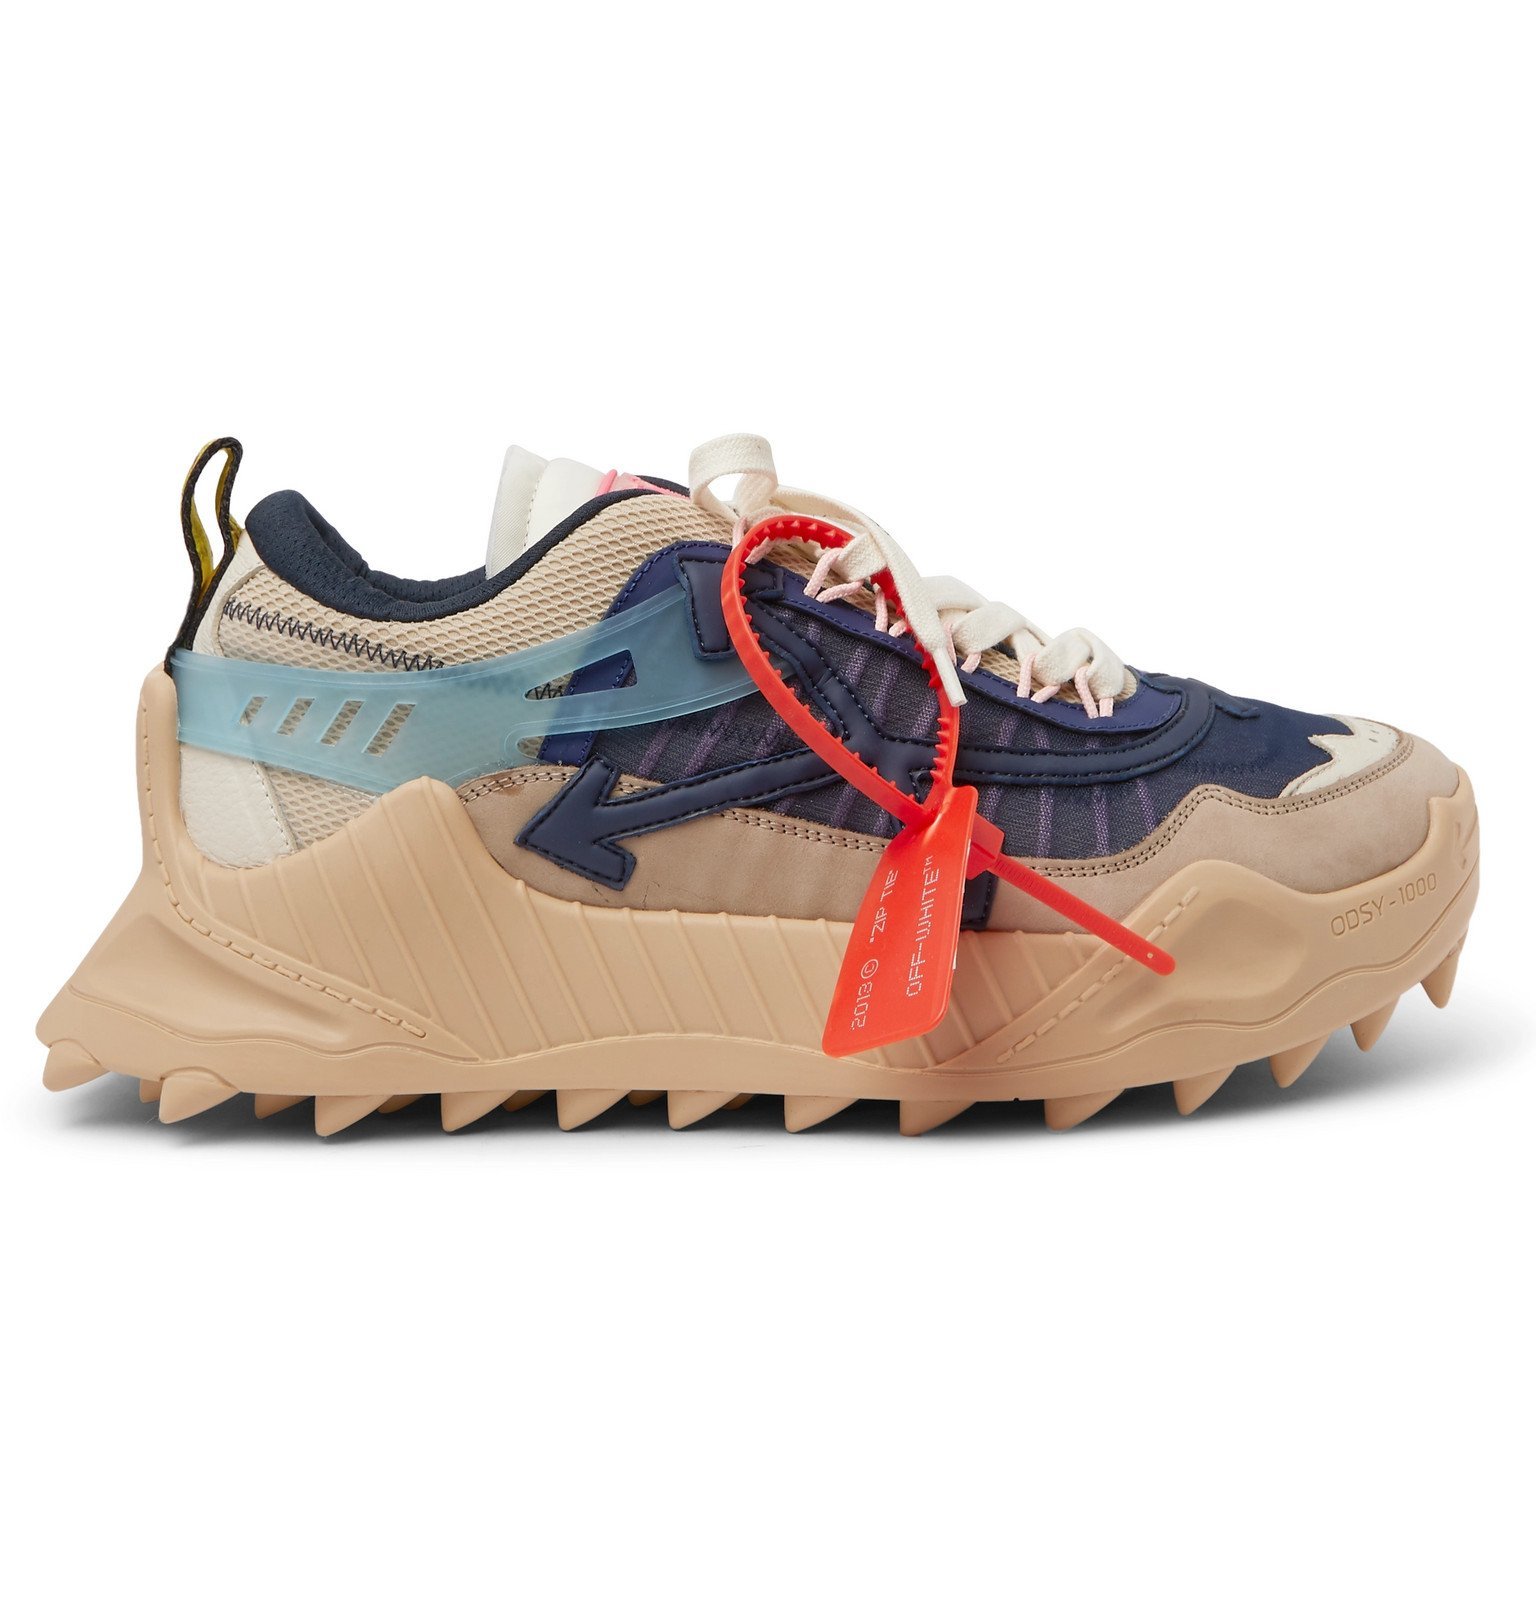 Off-White - Odsy-1000 Suede, Mesh and Rubber Sneakers - Blue Off-White